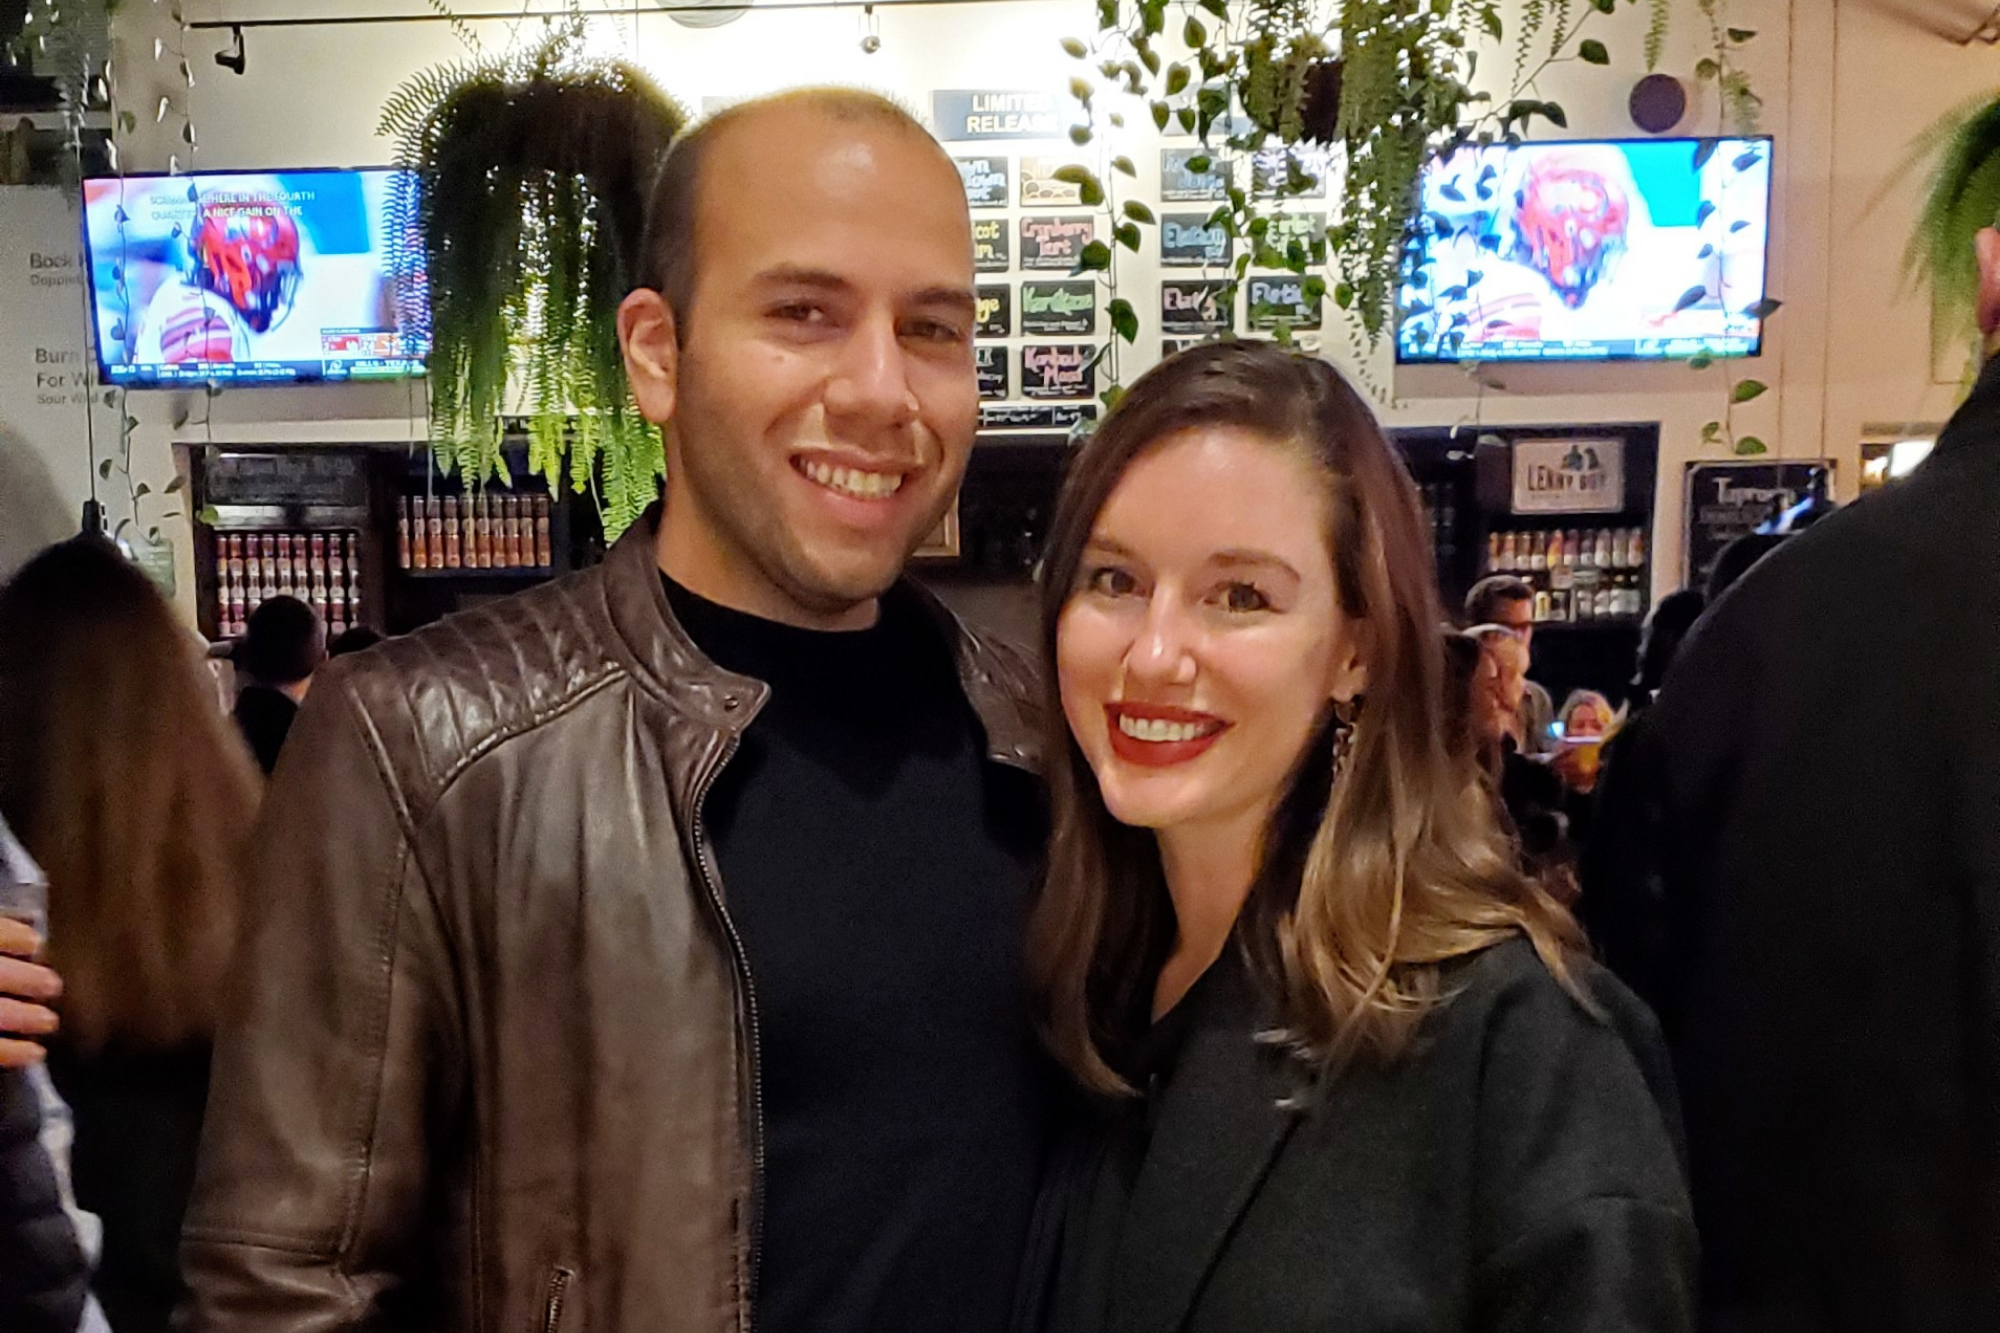 Michael and Alyssa at Lenny Boy on New Years 2020. He is wearing a black shirt and brown leather jacket, she is wearing a grey wool coat over a black top. They are both smiling at the camera, unaware of what 2020 would bring